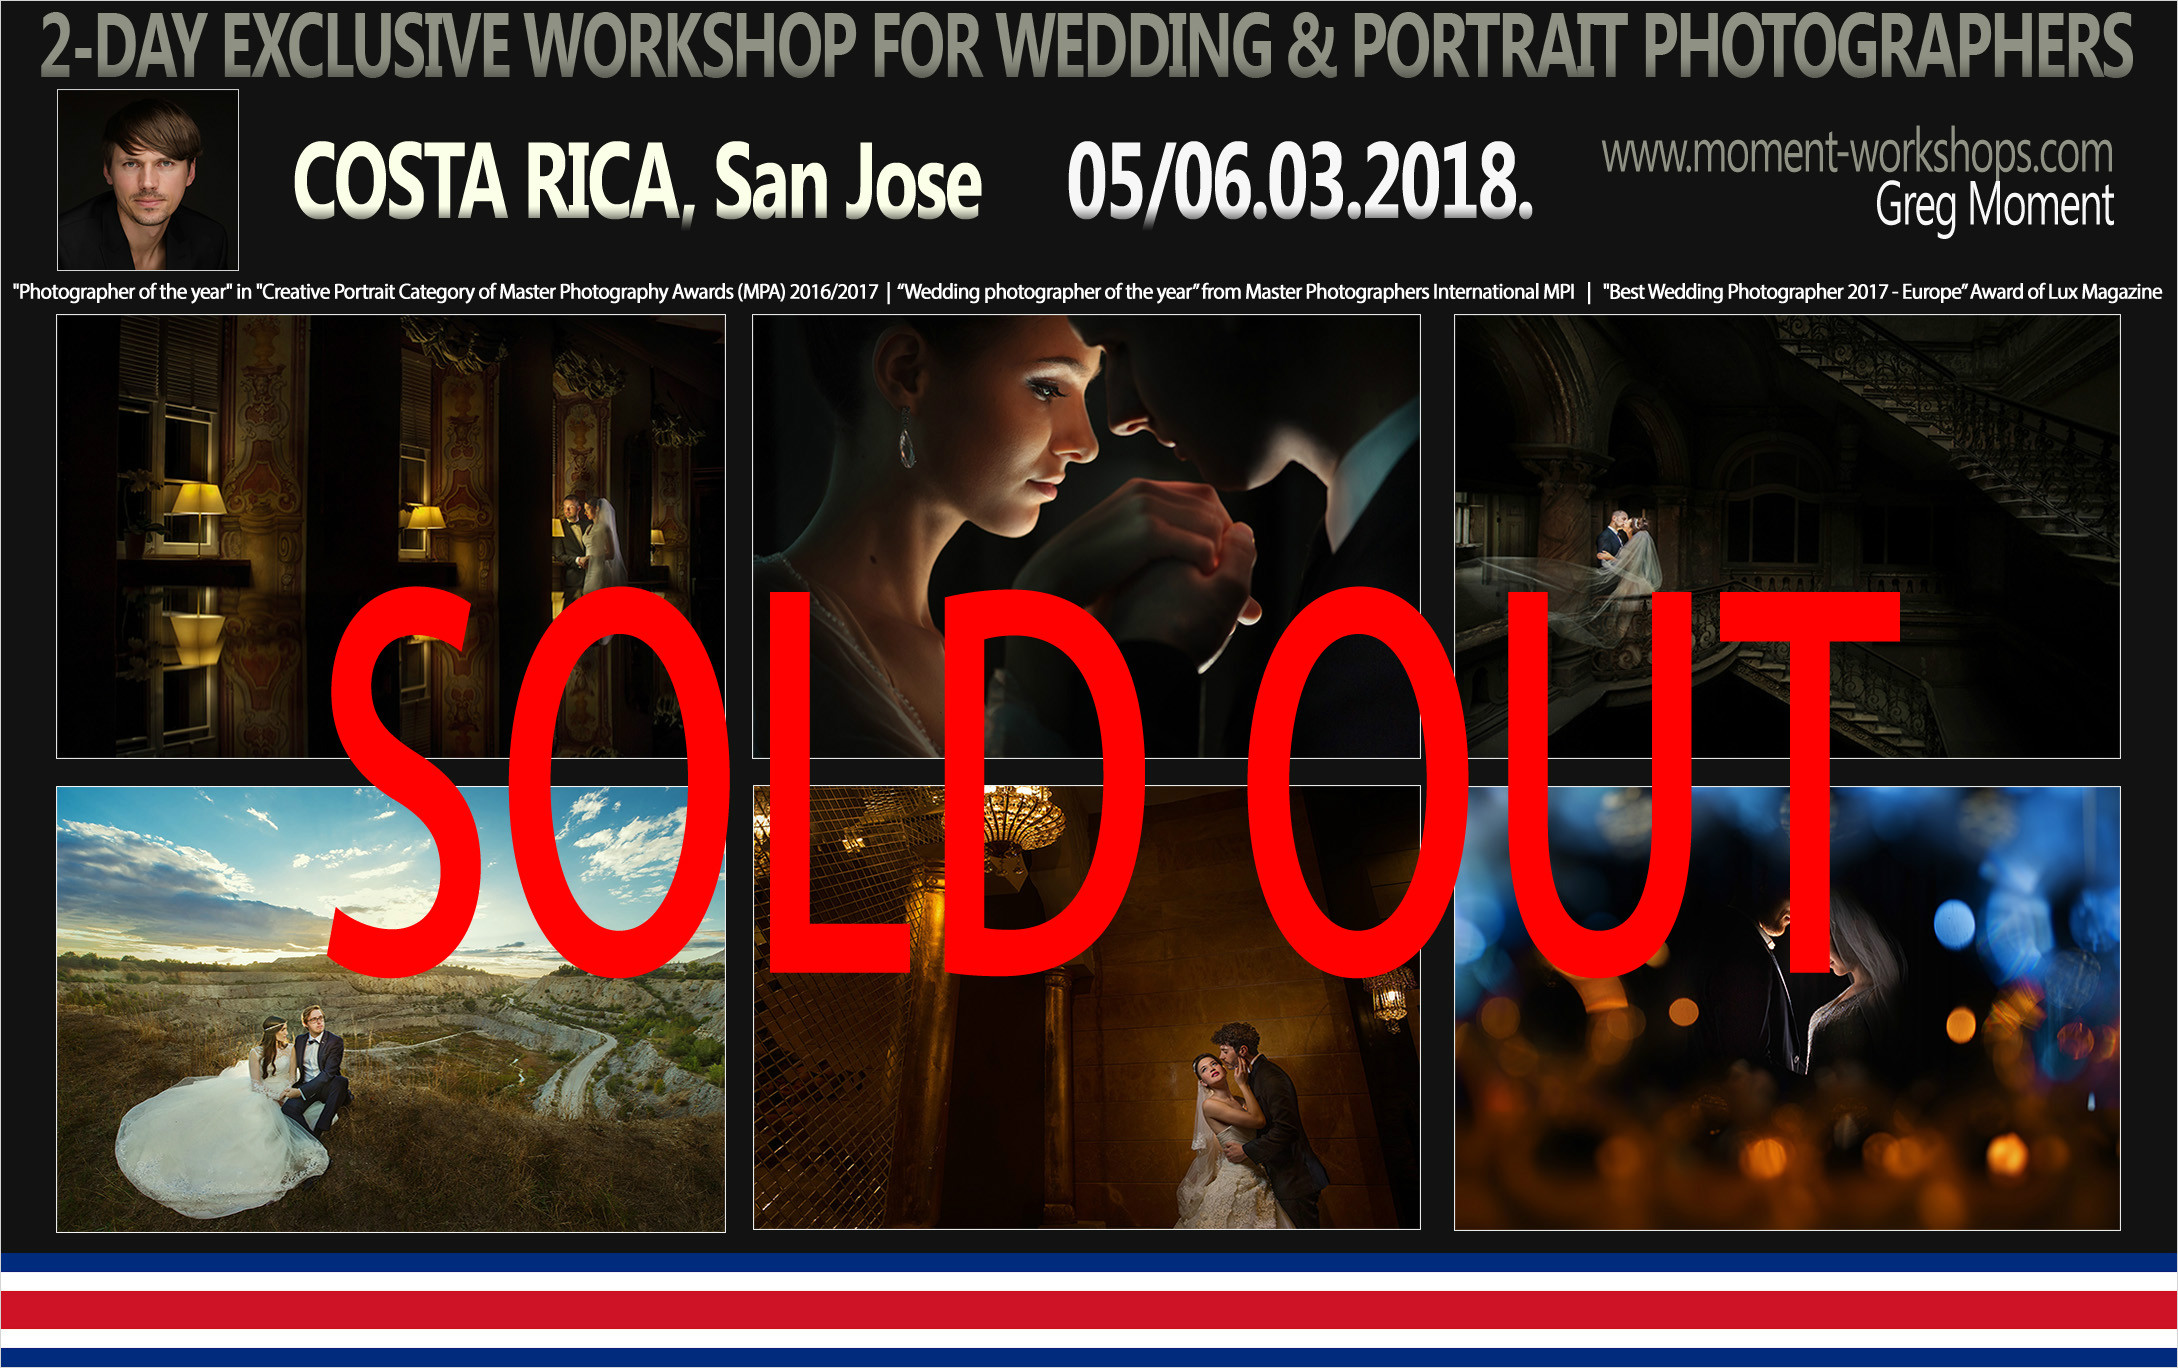 San Jose, Costa Rica 05/06.03.2018. SOLD OUT!